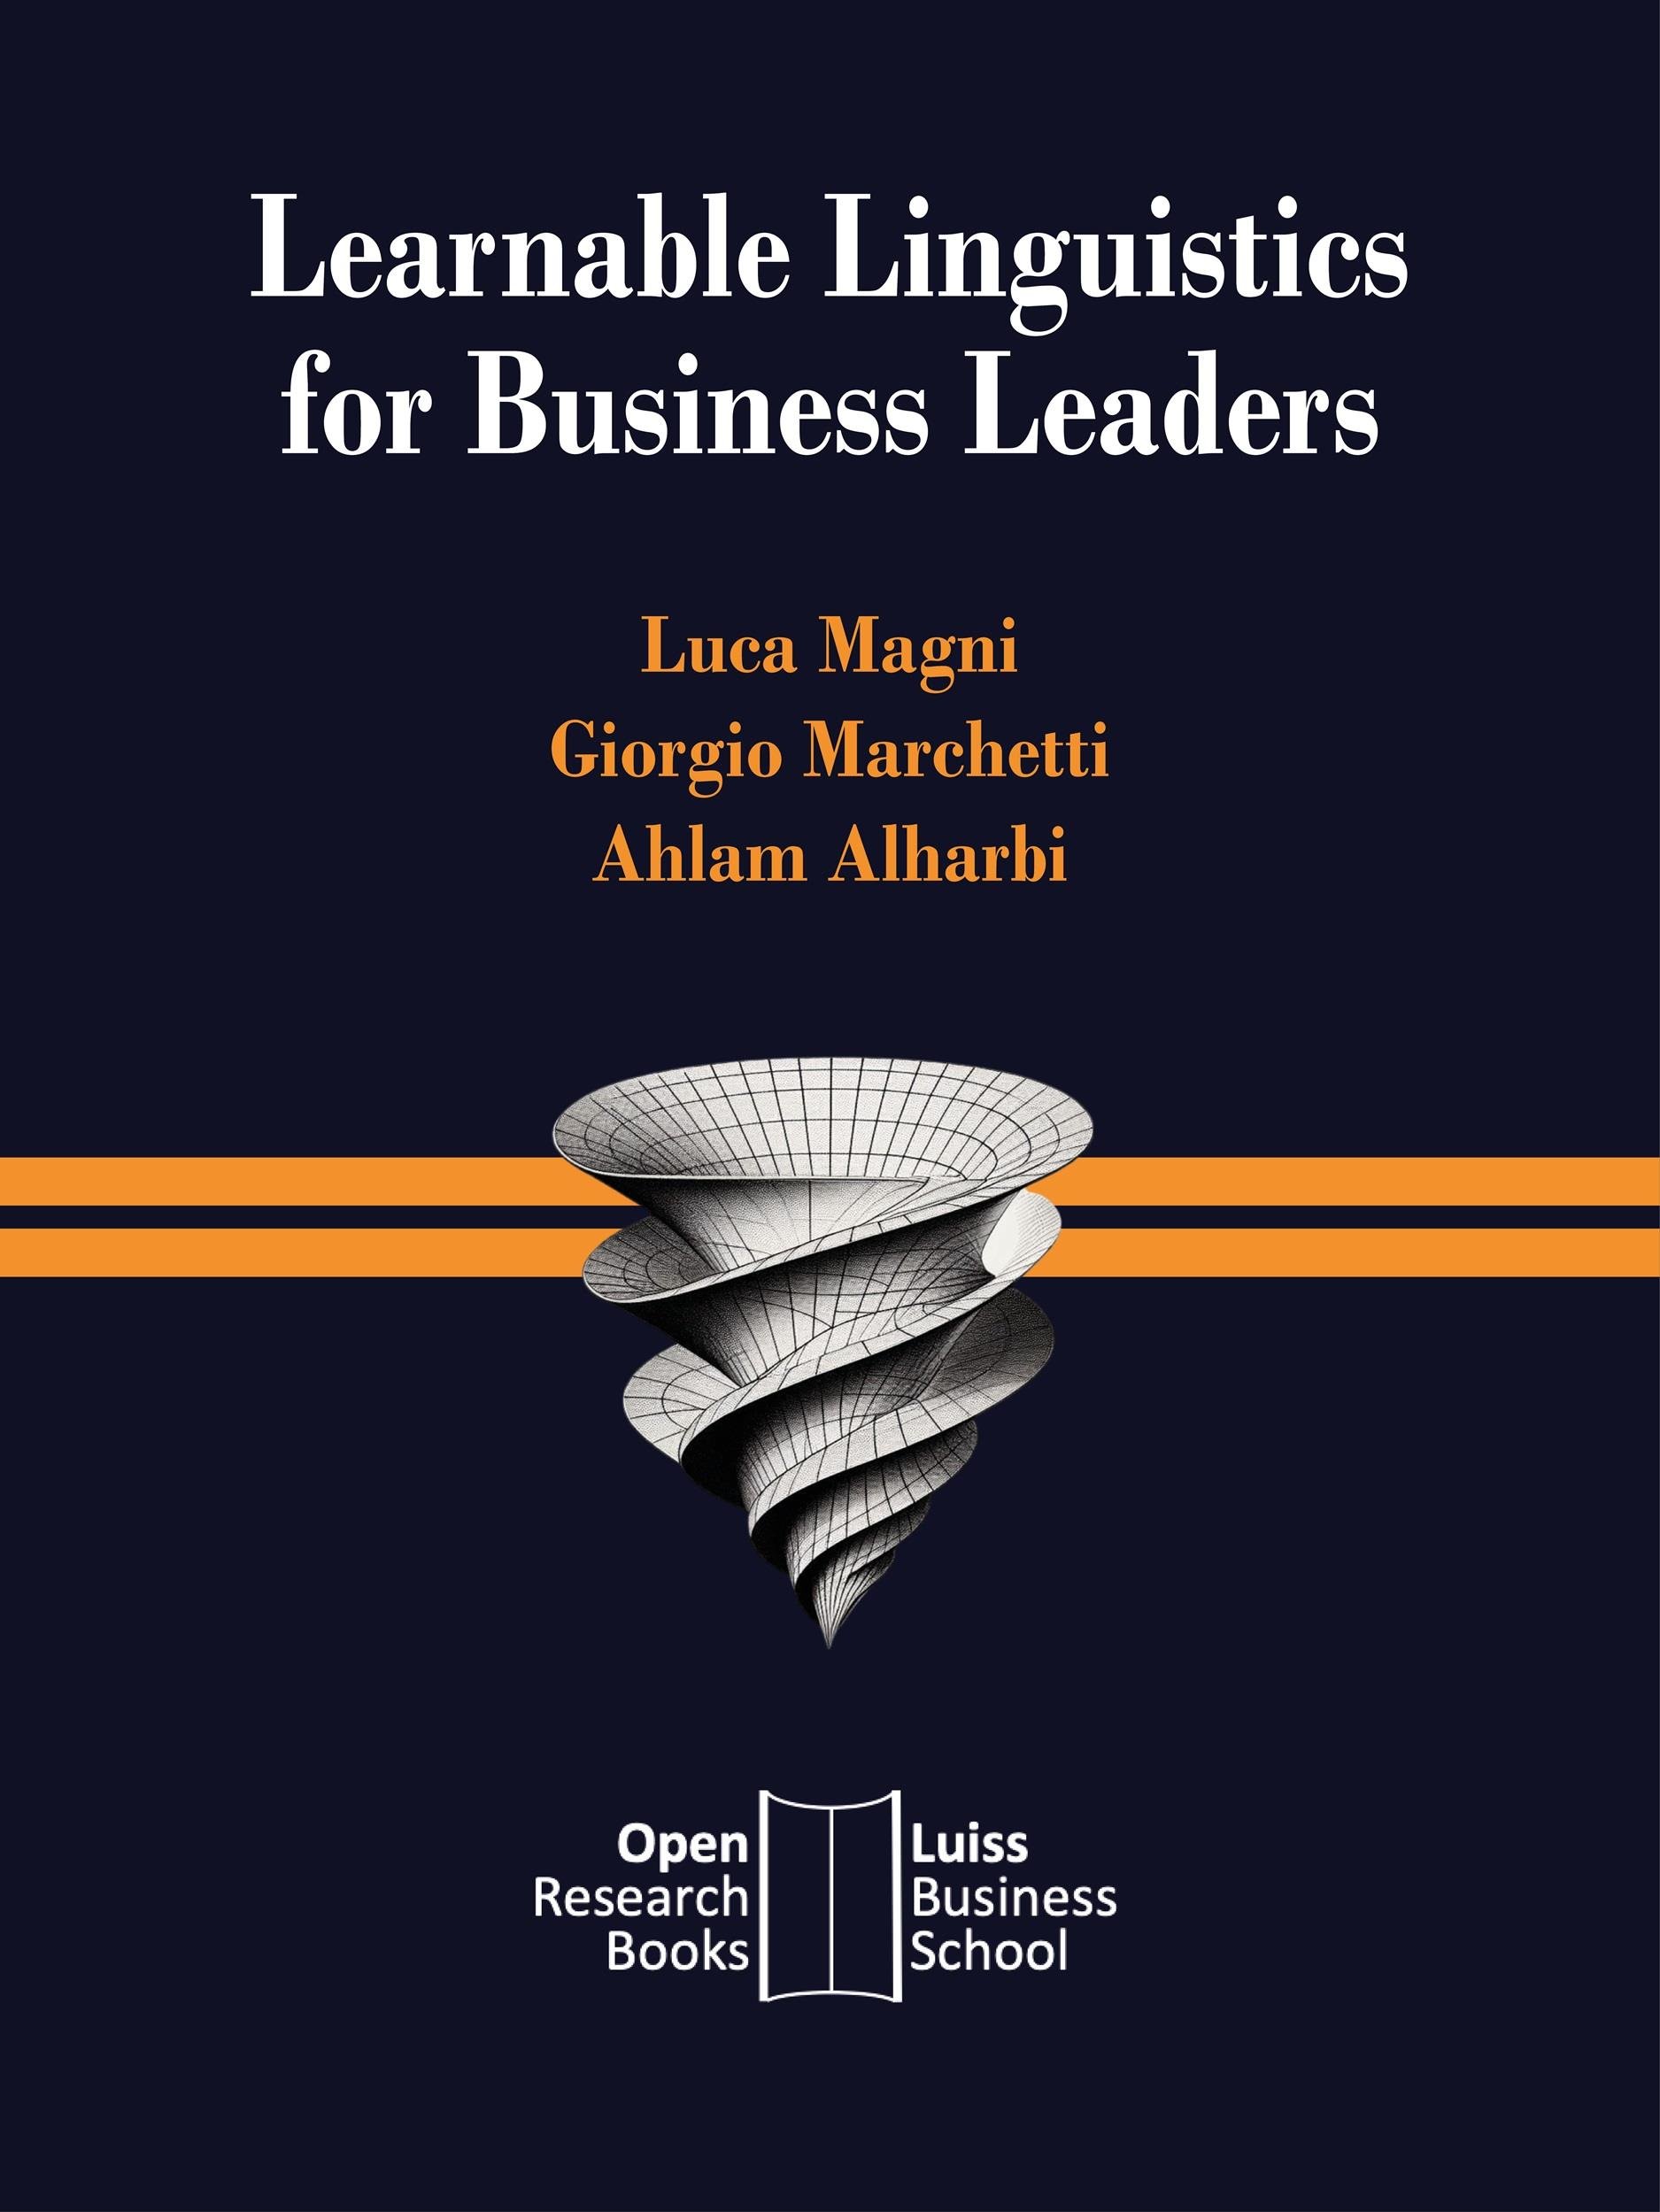 Learnable Linguistics for Business Leaders